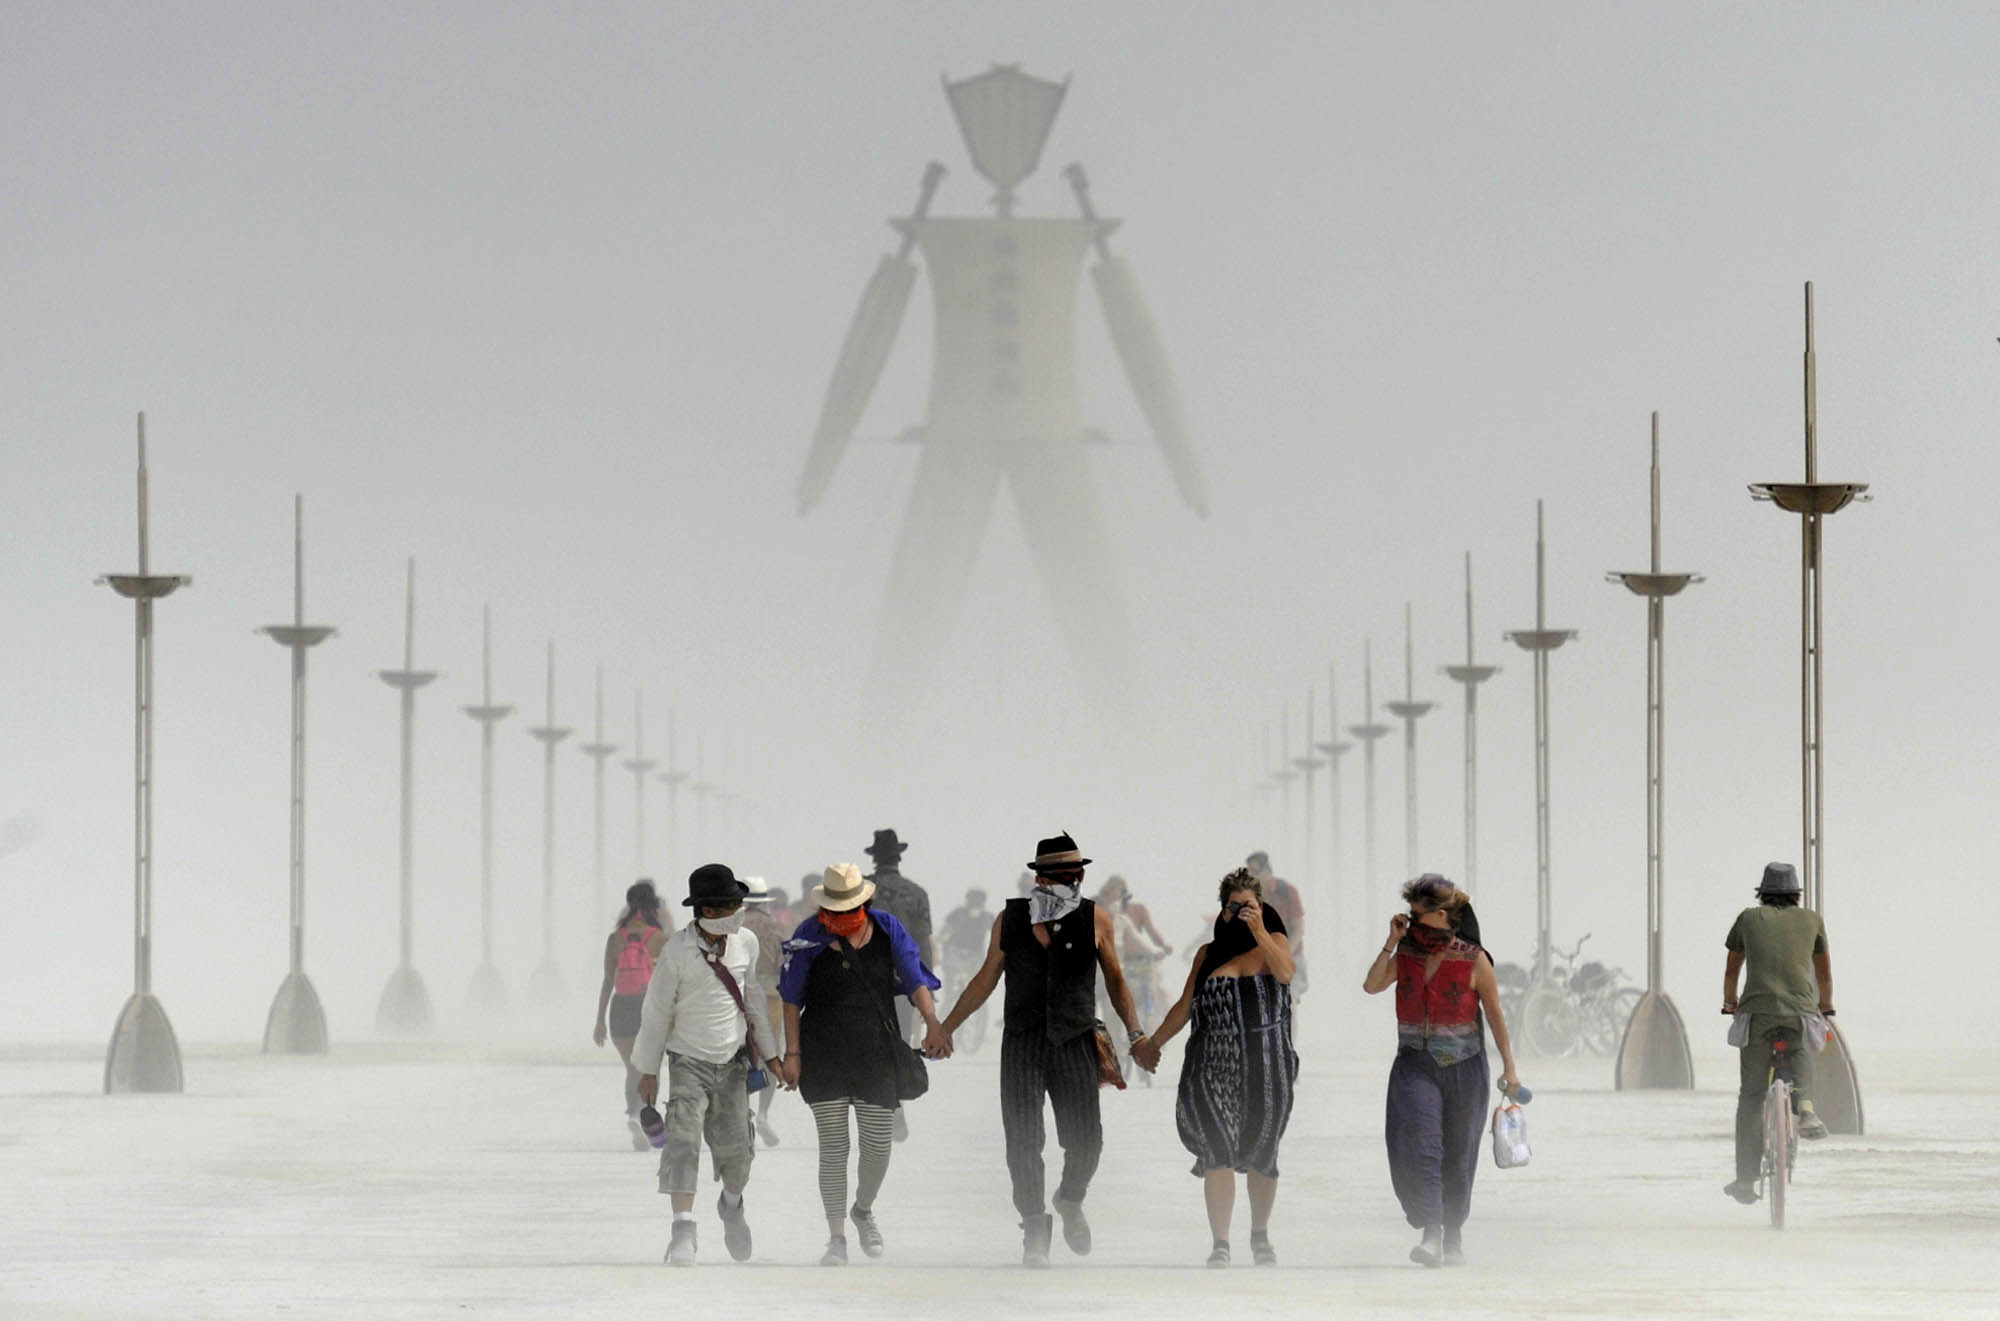 Burning Man participants walk through dust at the annual Burning Man event on the Black Rock Desert of Gerlach, Nev., on Friday, Aug. 29, 2014. Organizers call Burning Man the largest outdoor arts festival in North America, with its drum circles, decorated art cars, guerrilla theatrics and colorful theme camps. (Andy Barron—AP)